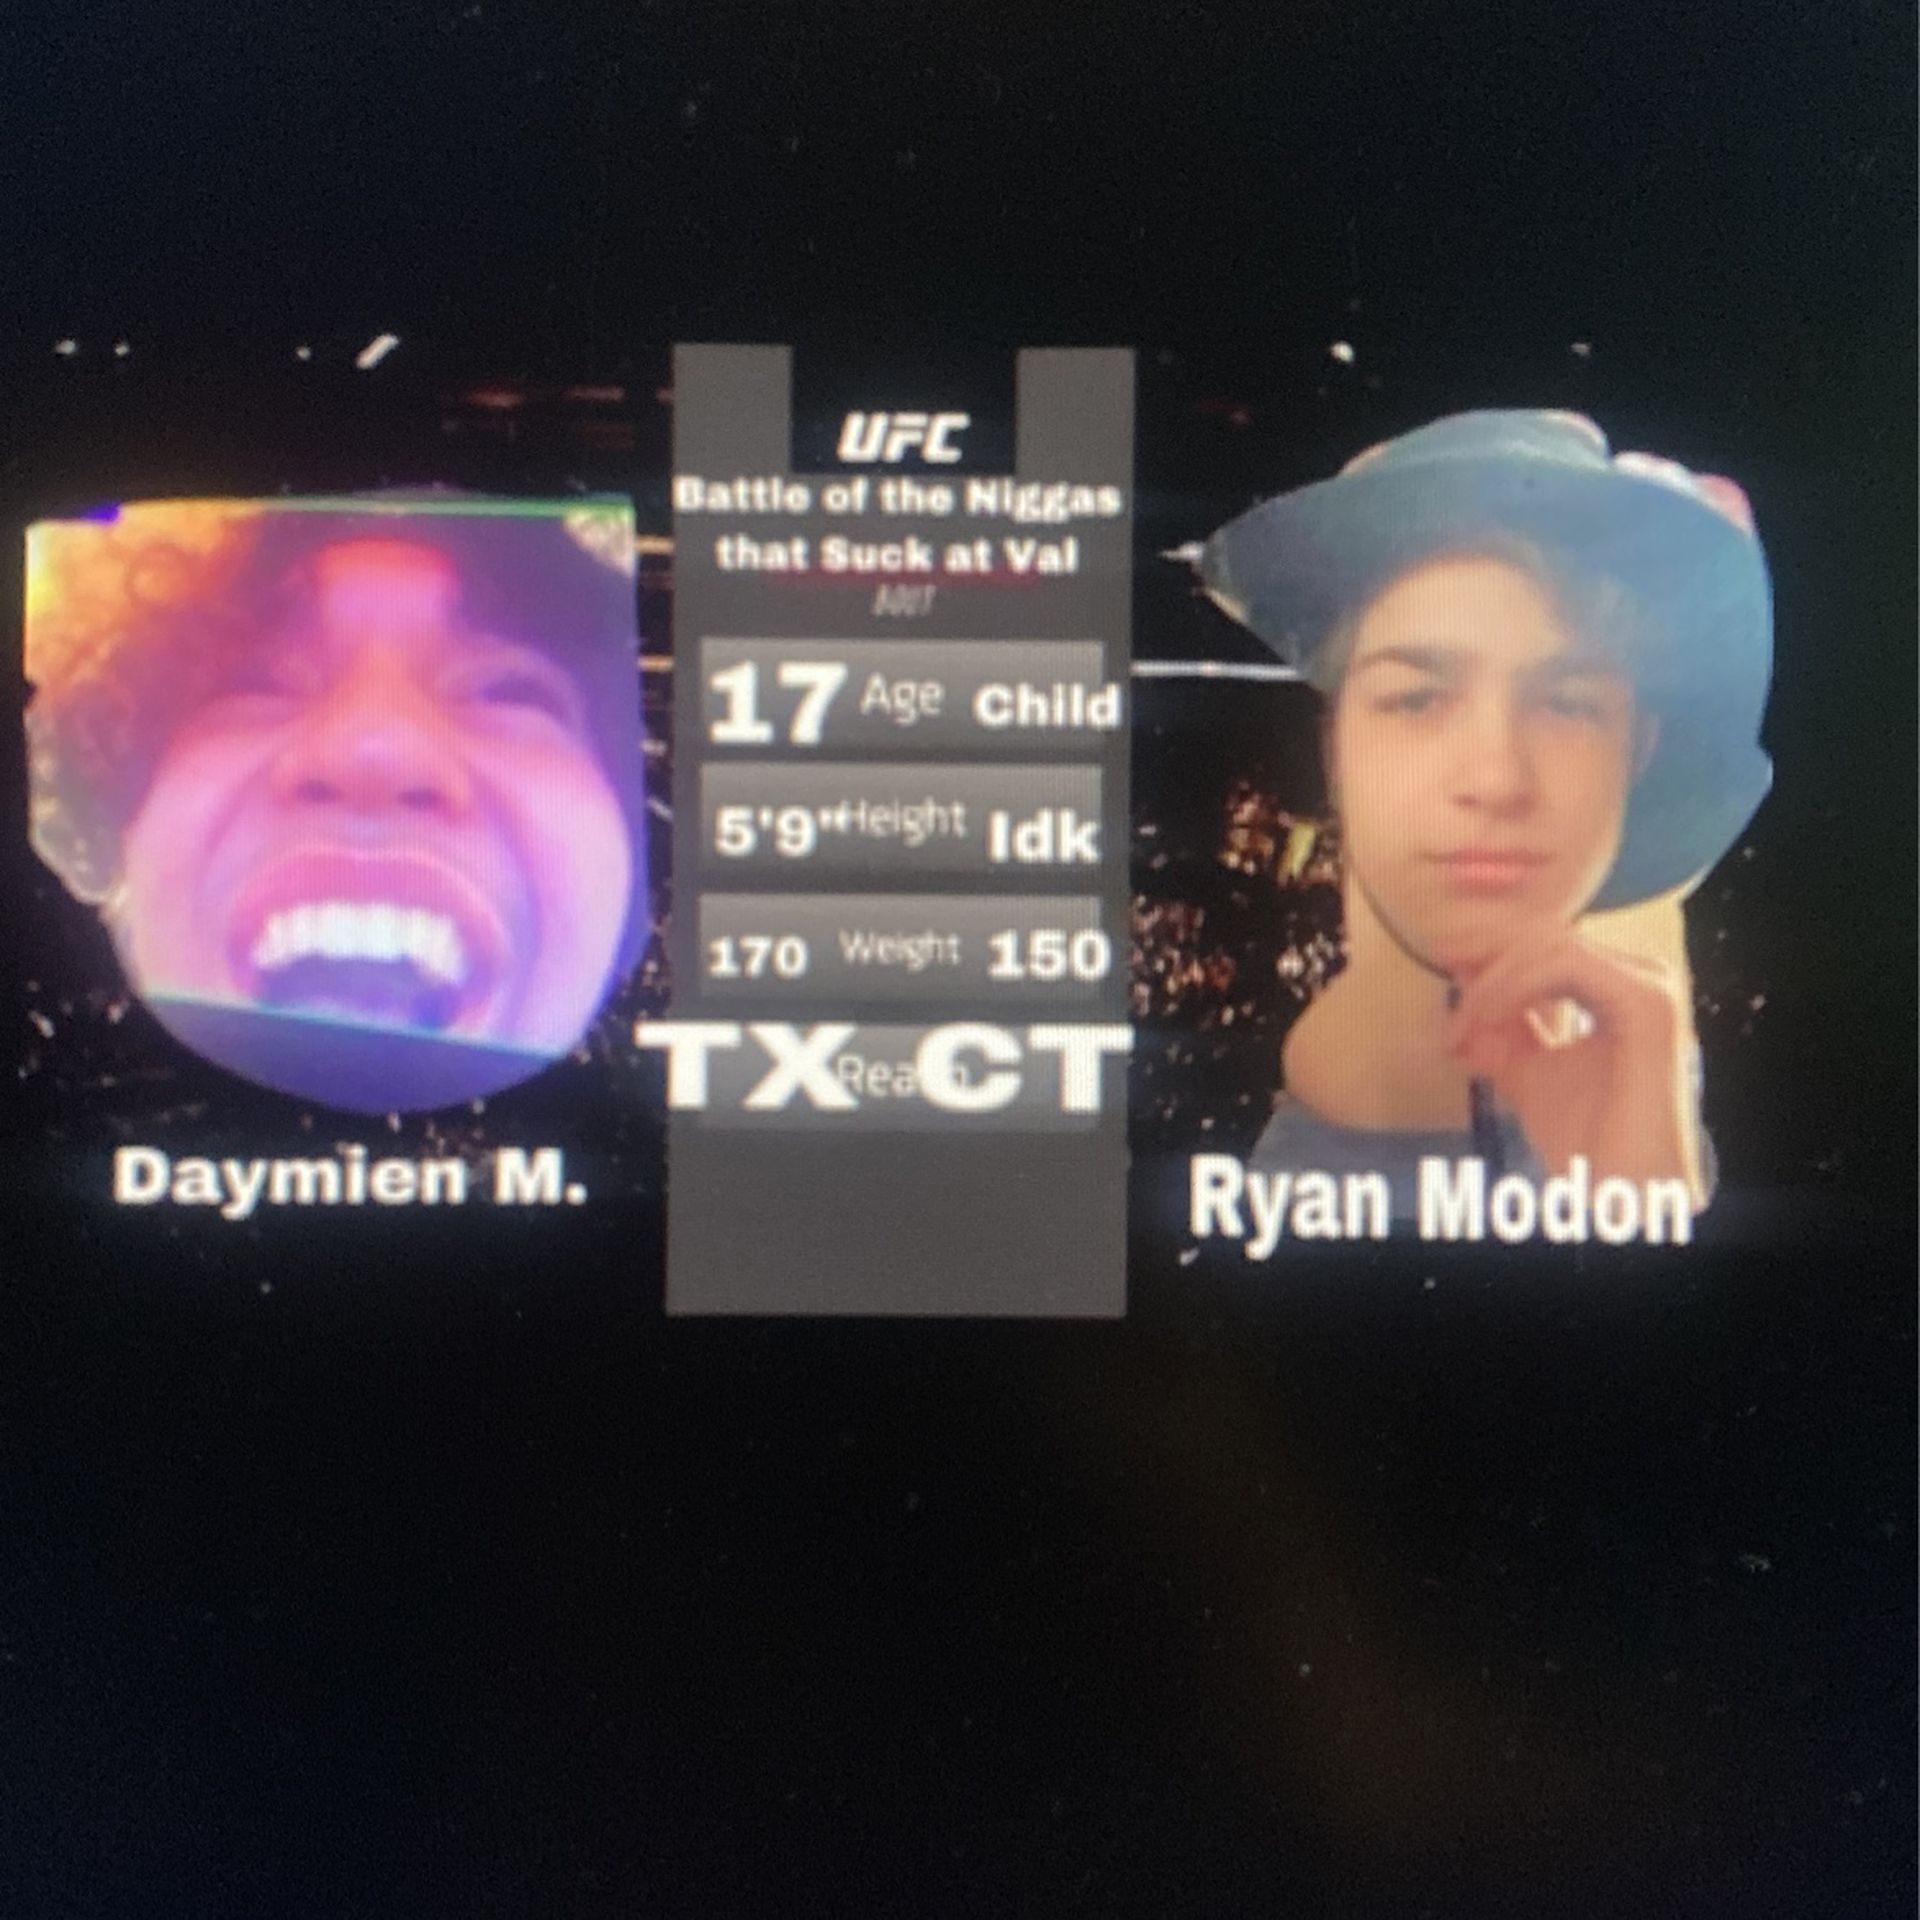 One Ticket For Daymien Vs Ryan TMA